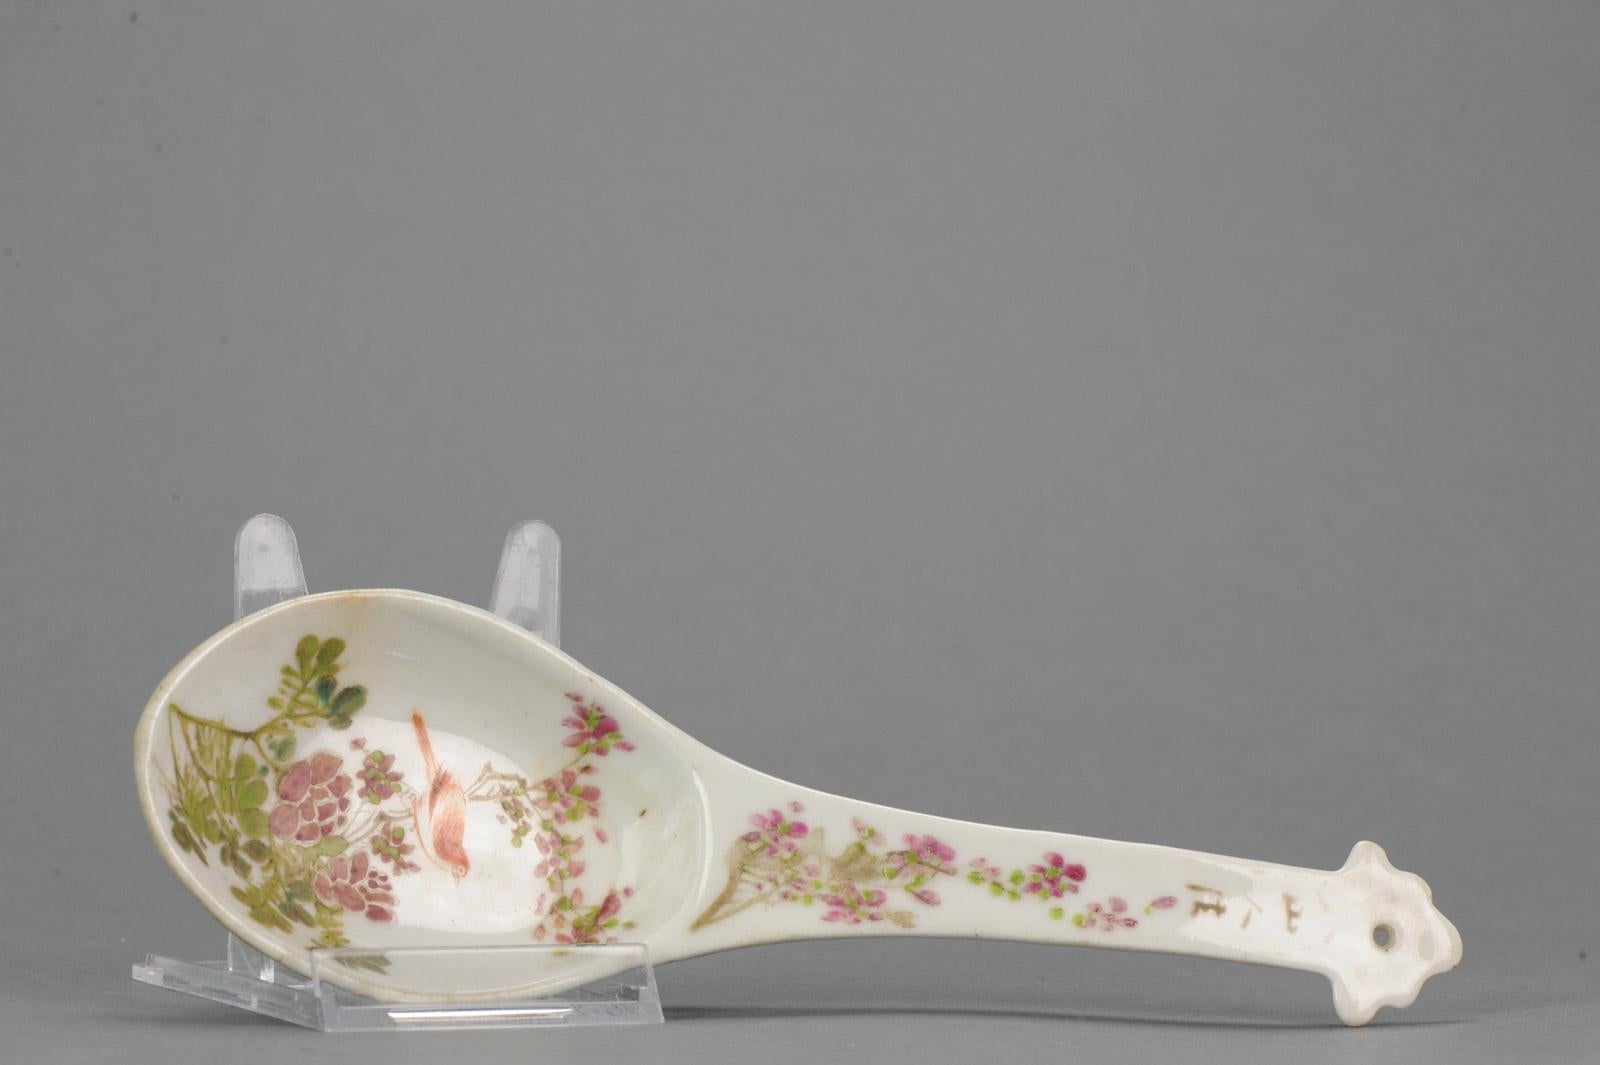 Antique Republic Chinese Porcelain Large Spoon, 19th/20th Century.

Very nice Spoon.

Additional information:
Material: Porcelain & Pottery
Type: Spoons
Color: Blue & White
Region of Origin: China
Period: 19th century, 20th century Qing (1661 -